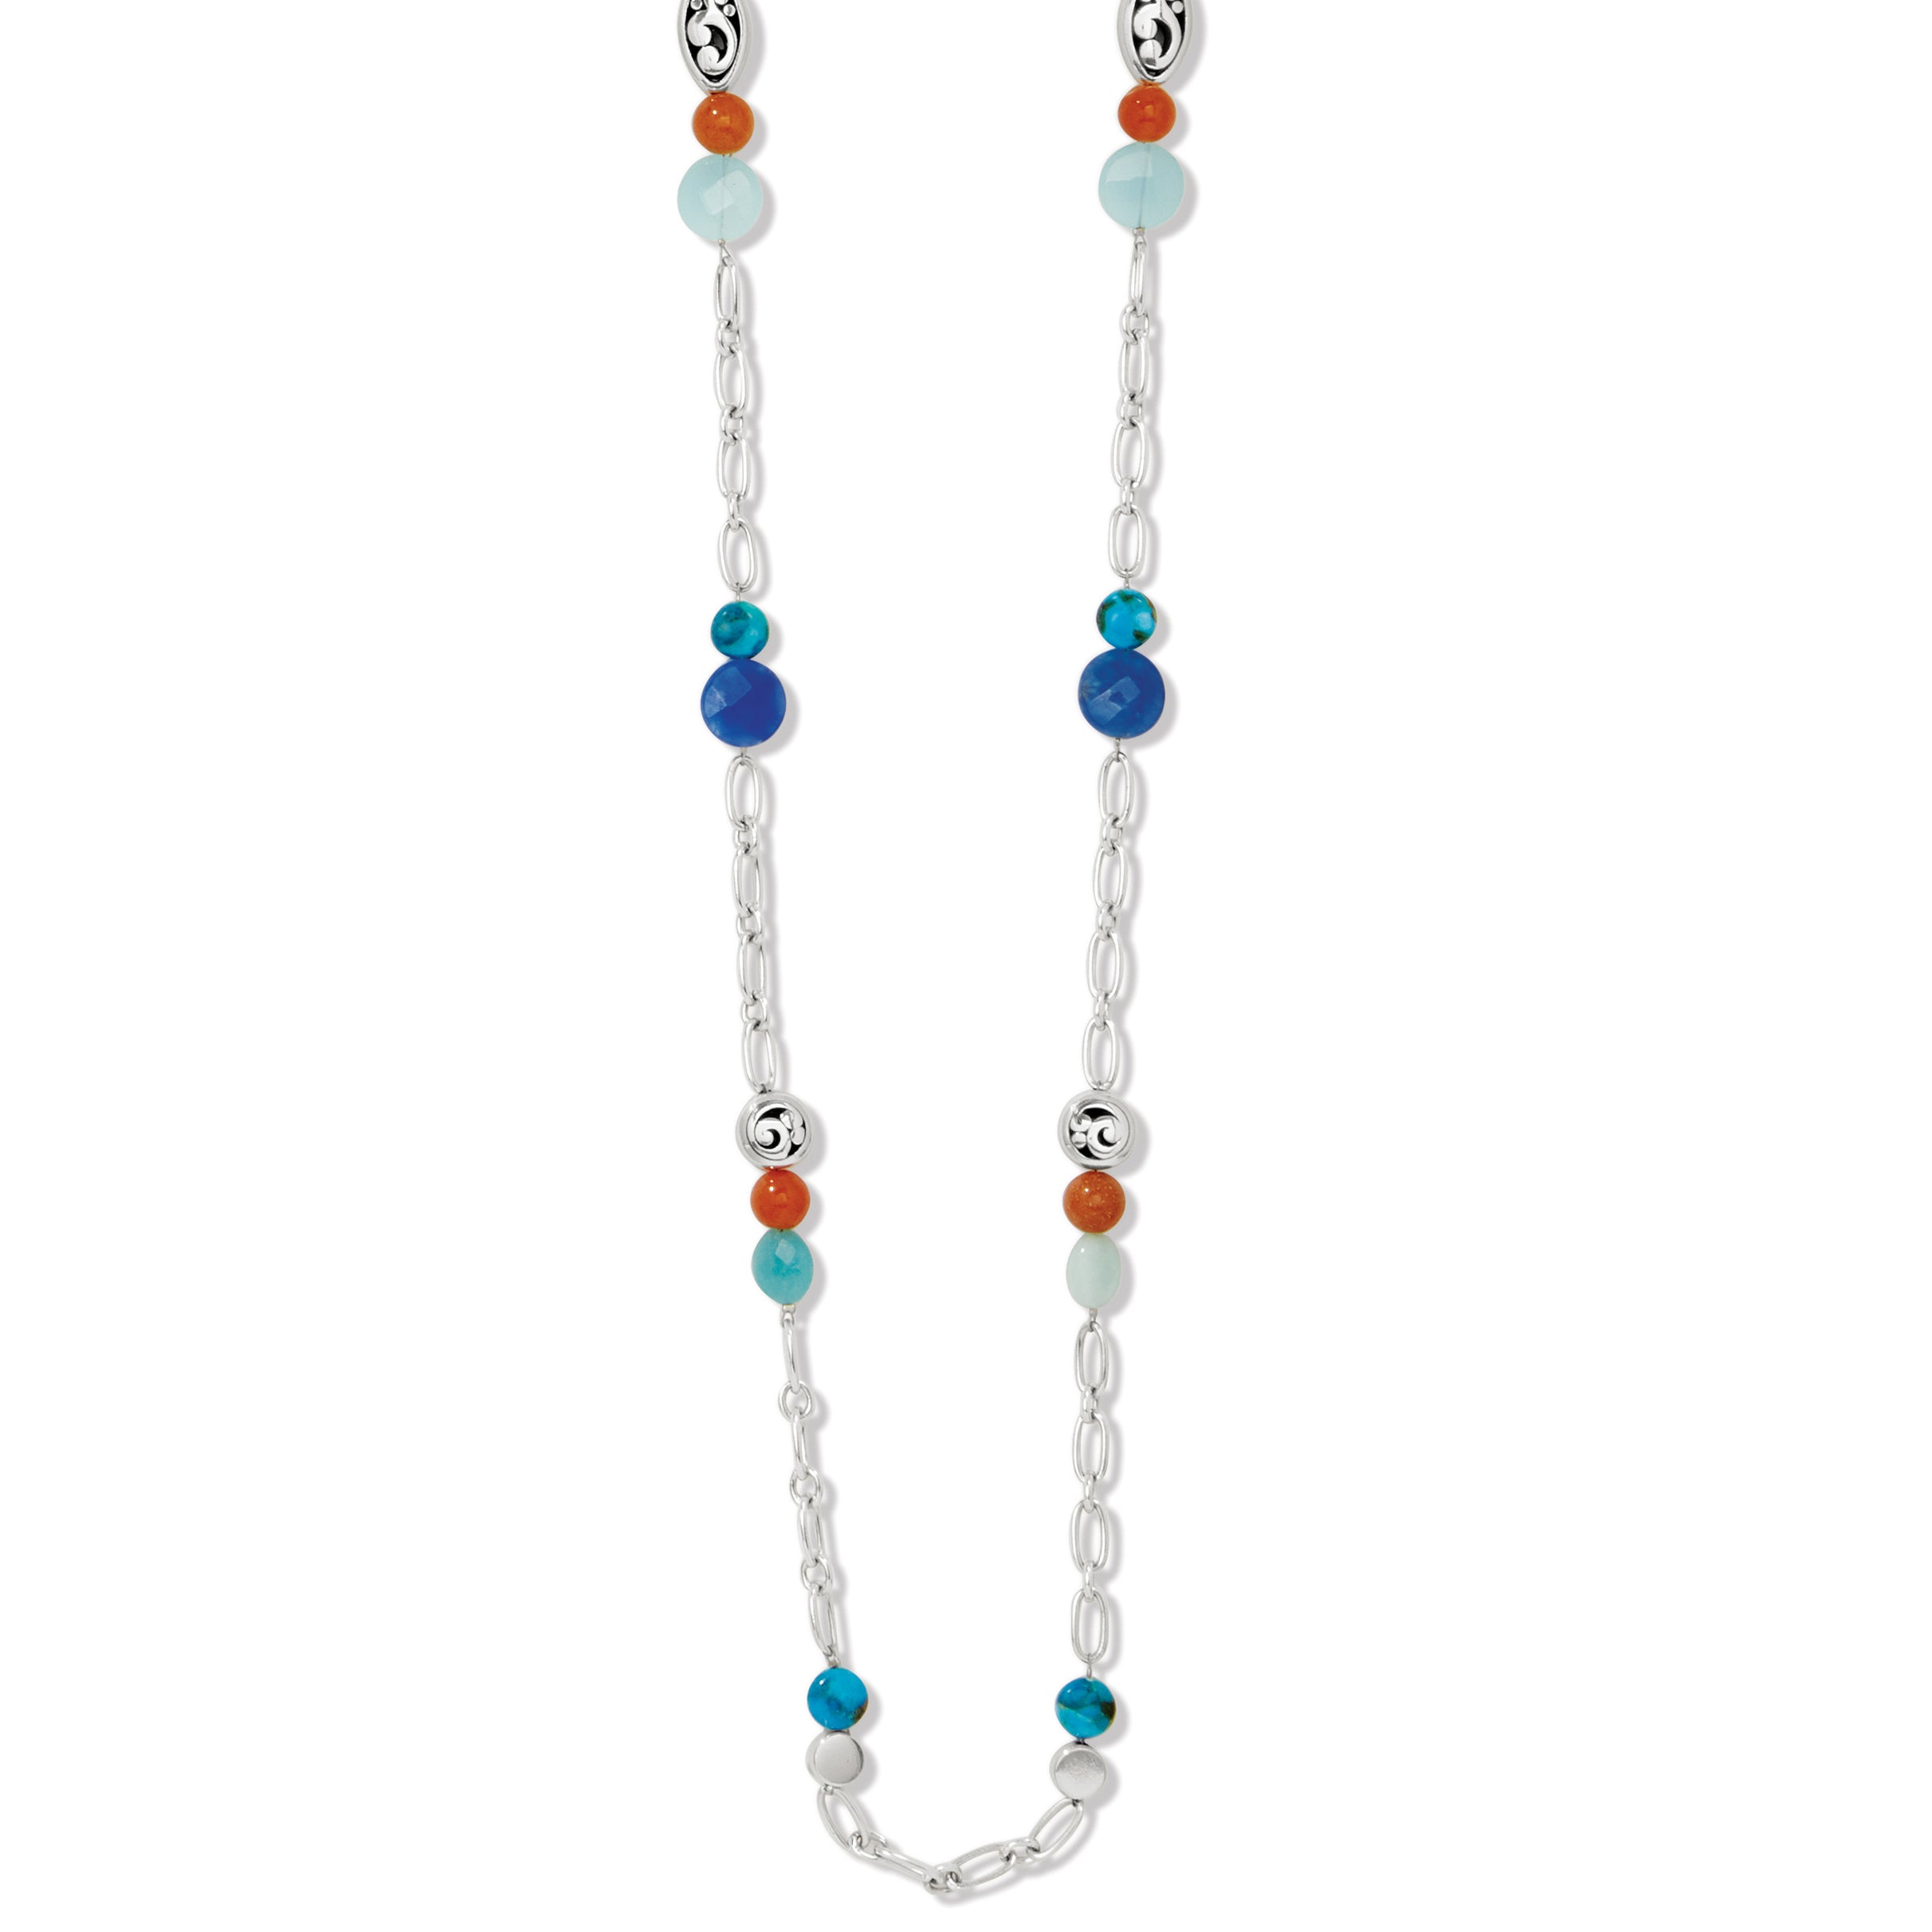 Contempo Chroma Long Necklace Front View